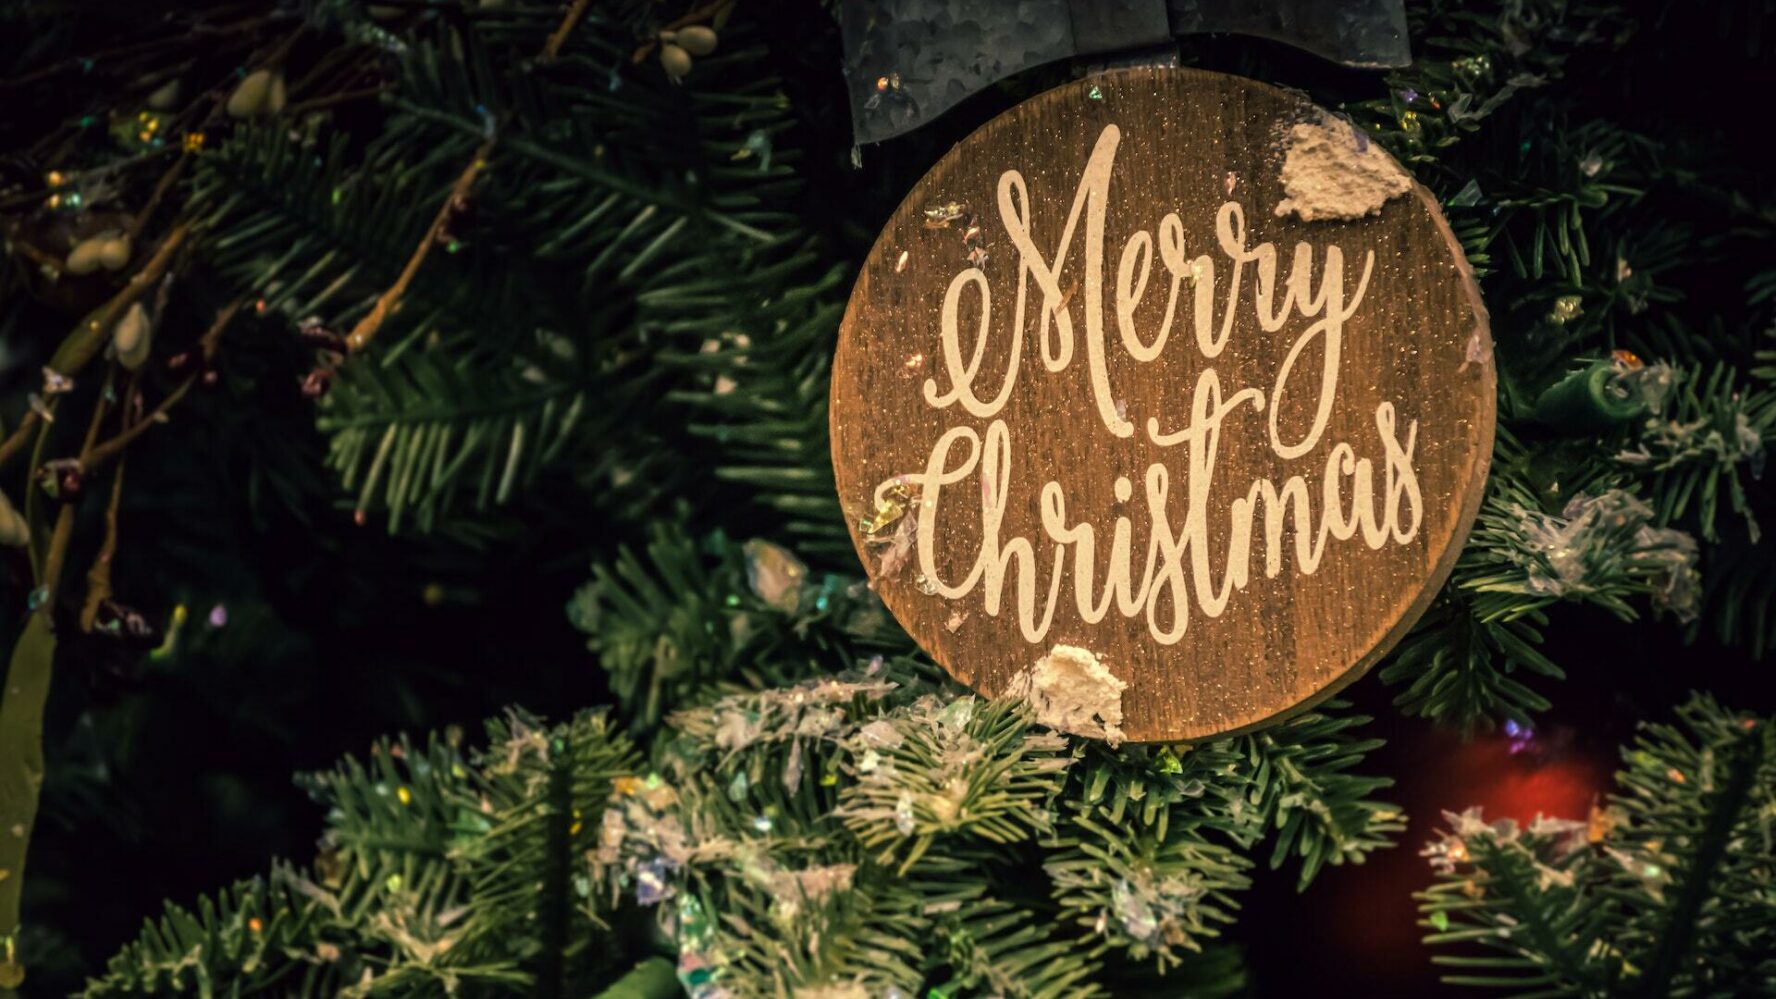 A round tree ornament features the words Merry Christmas